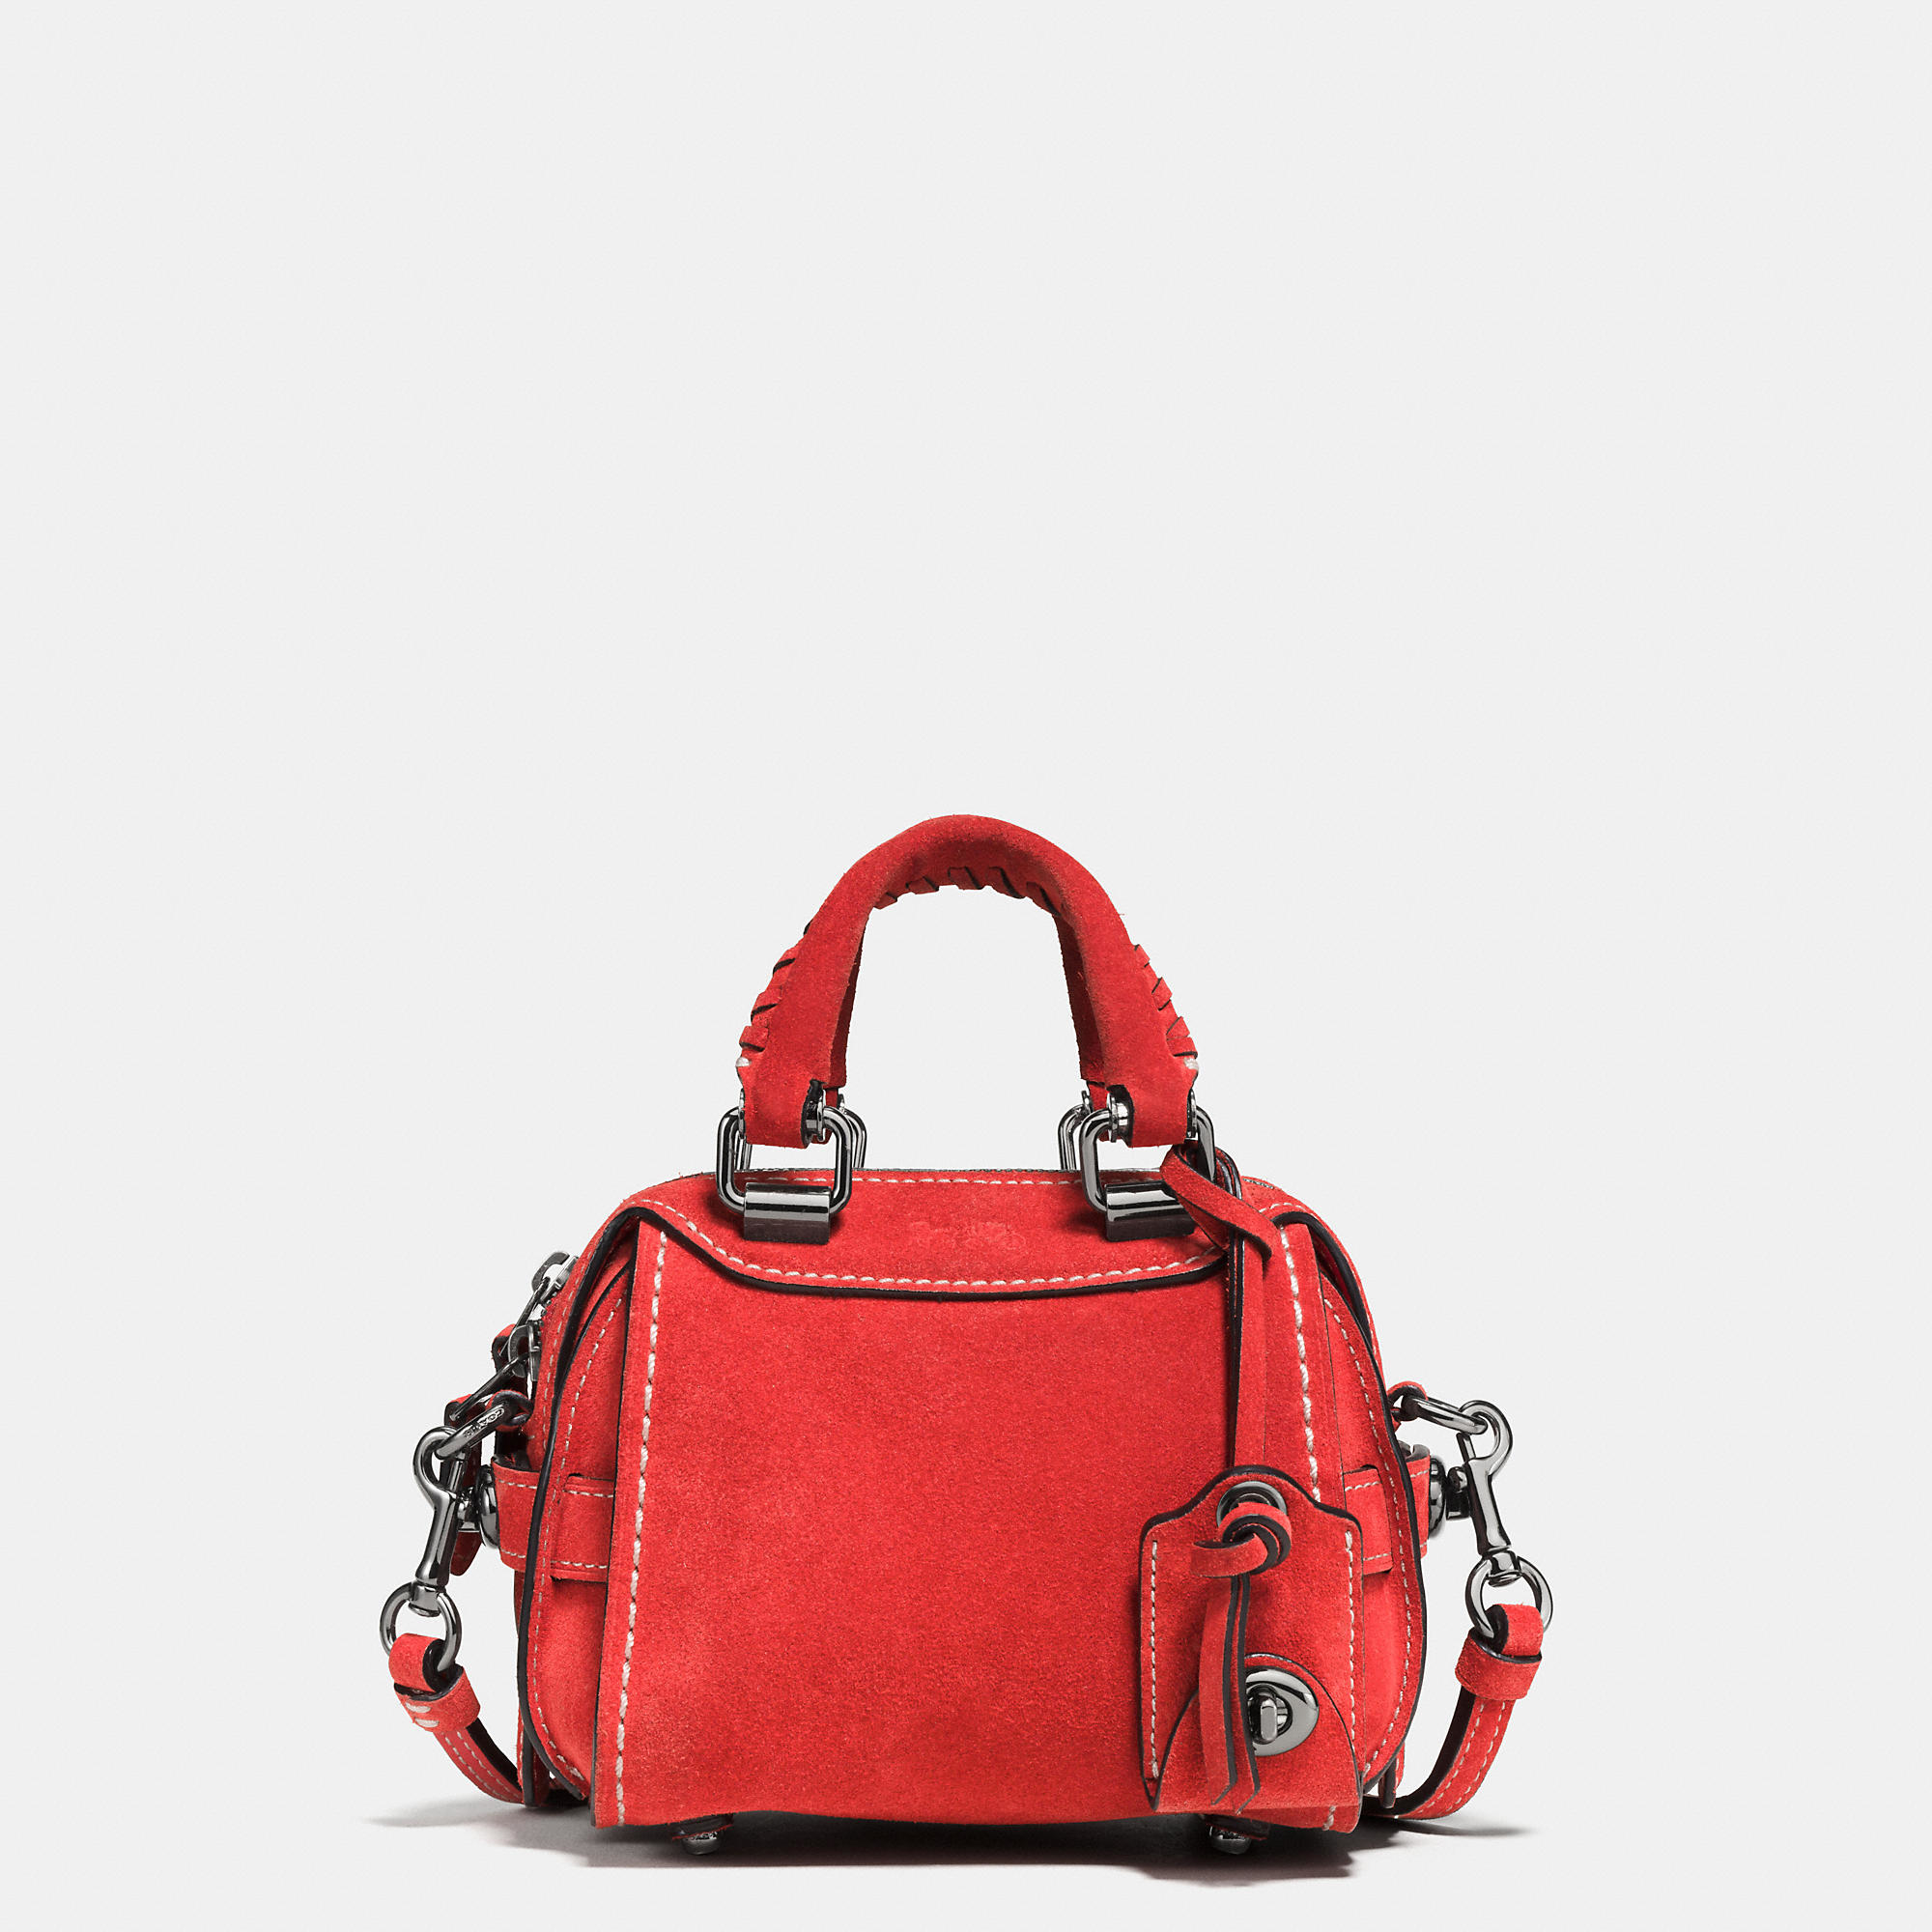 Lyst - Coach Ace Satchel 14 In Suede in Red